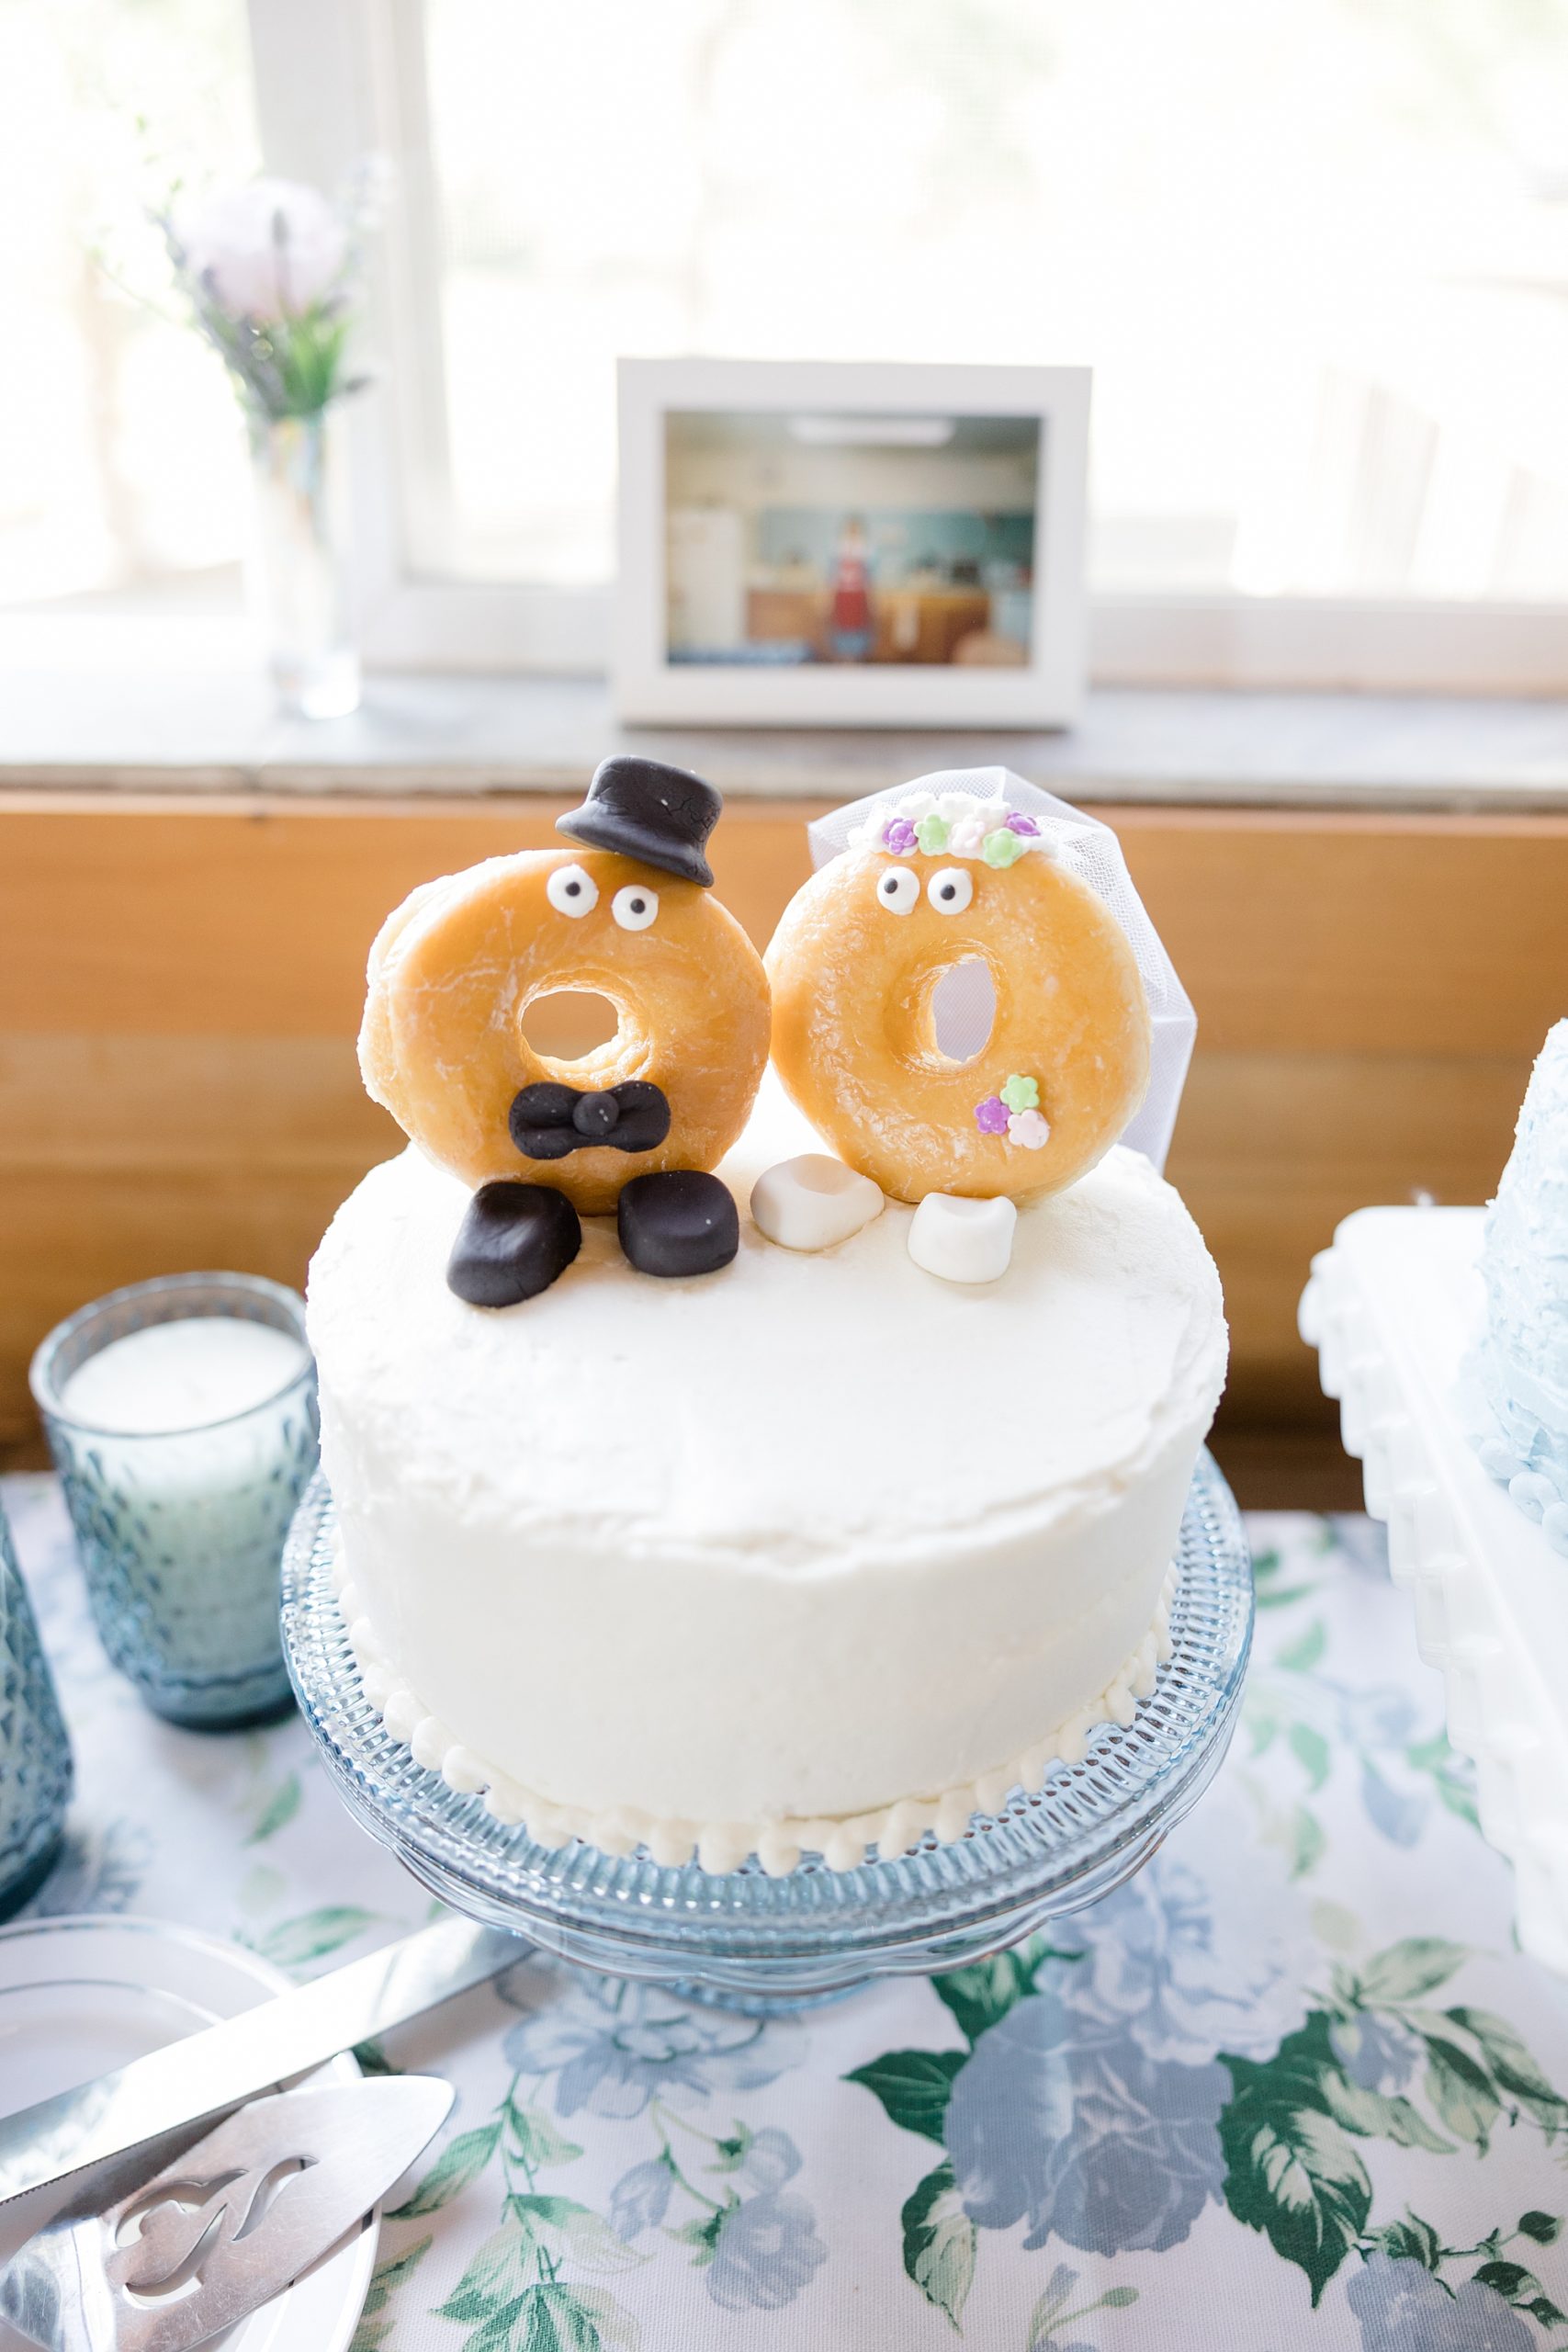 groom's cake with donut topper for rustic New York wedding reception